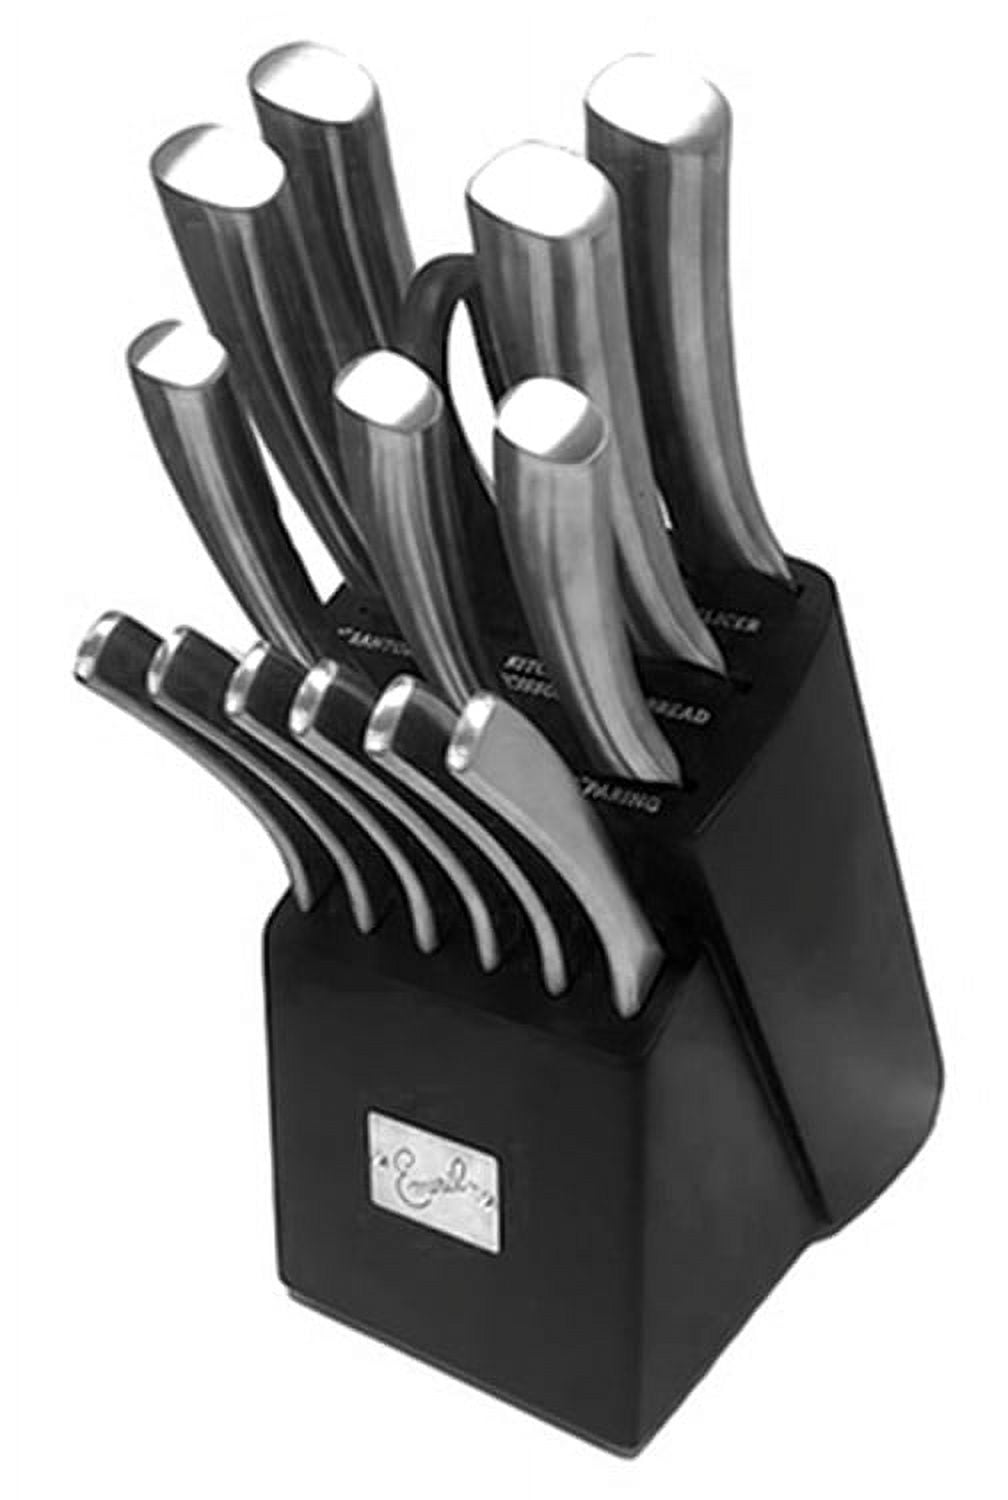 Emeril Forged Cutlery 15 Pc. Set In A Natural Wood Block